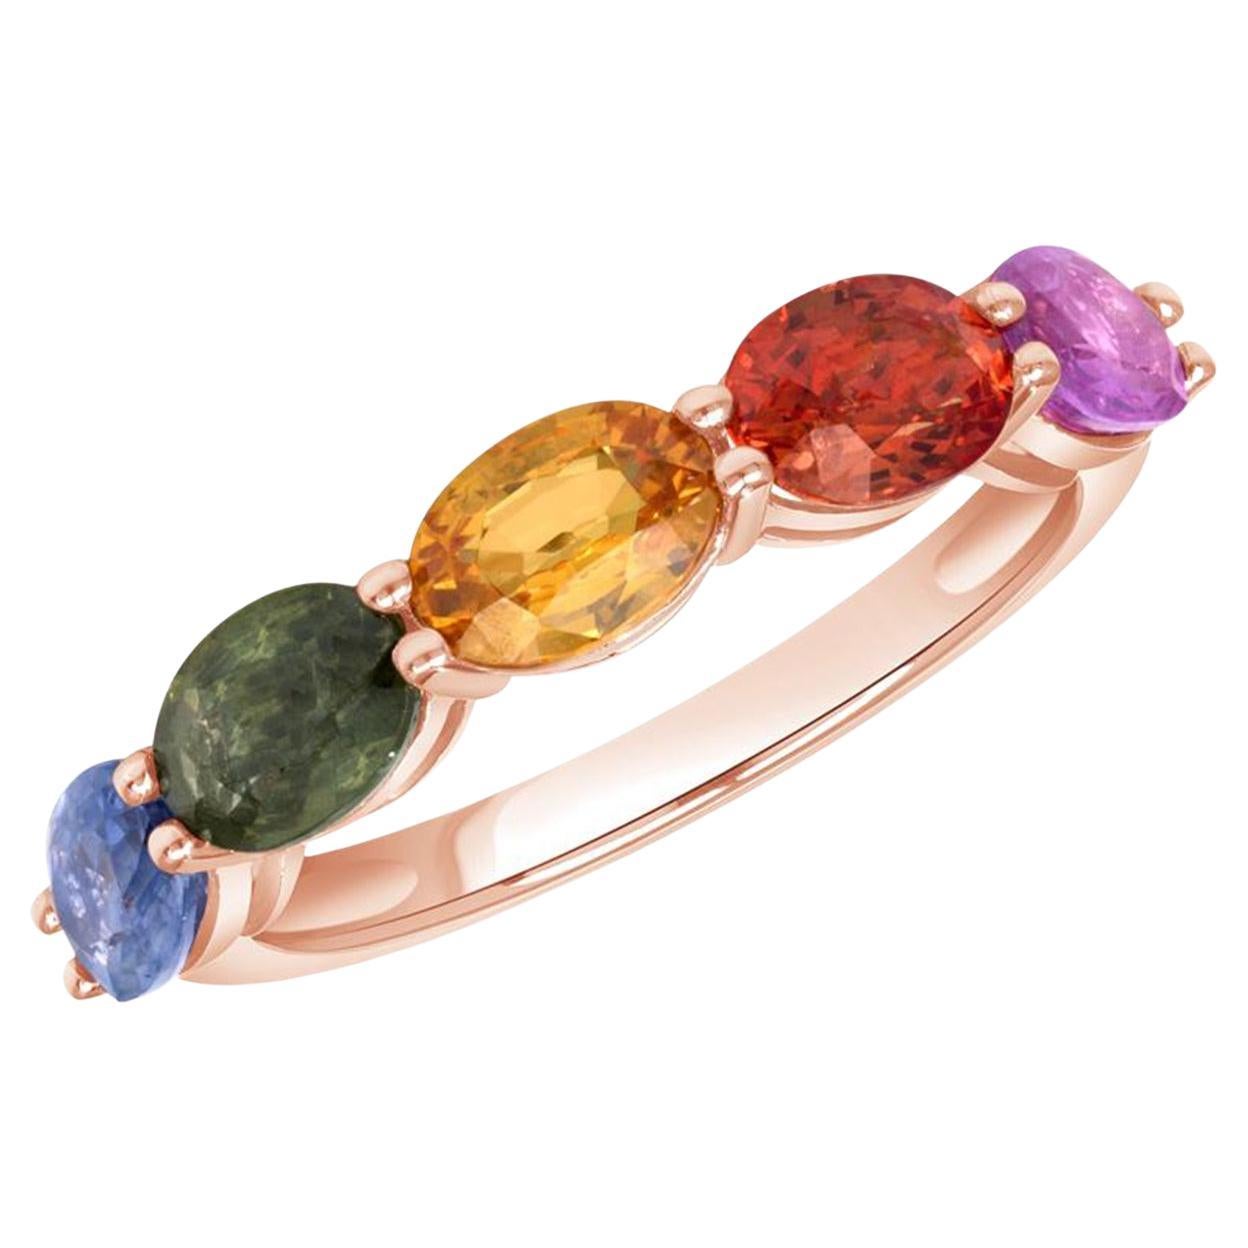 2.8 CT Multicolor Sapphire in 14K Rose Gold wedding Band Ring Size 6.5 For Sale